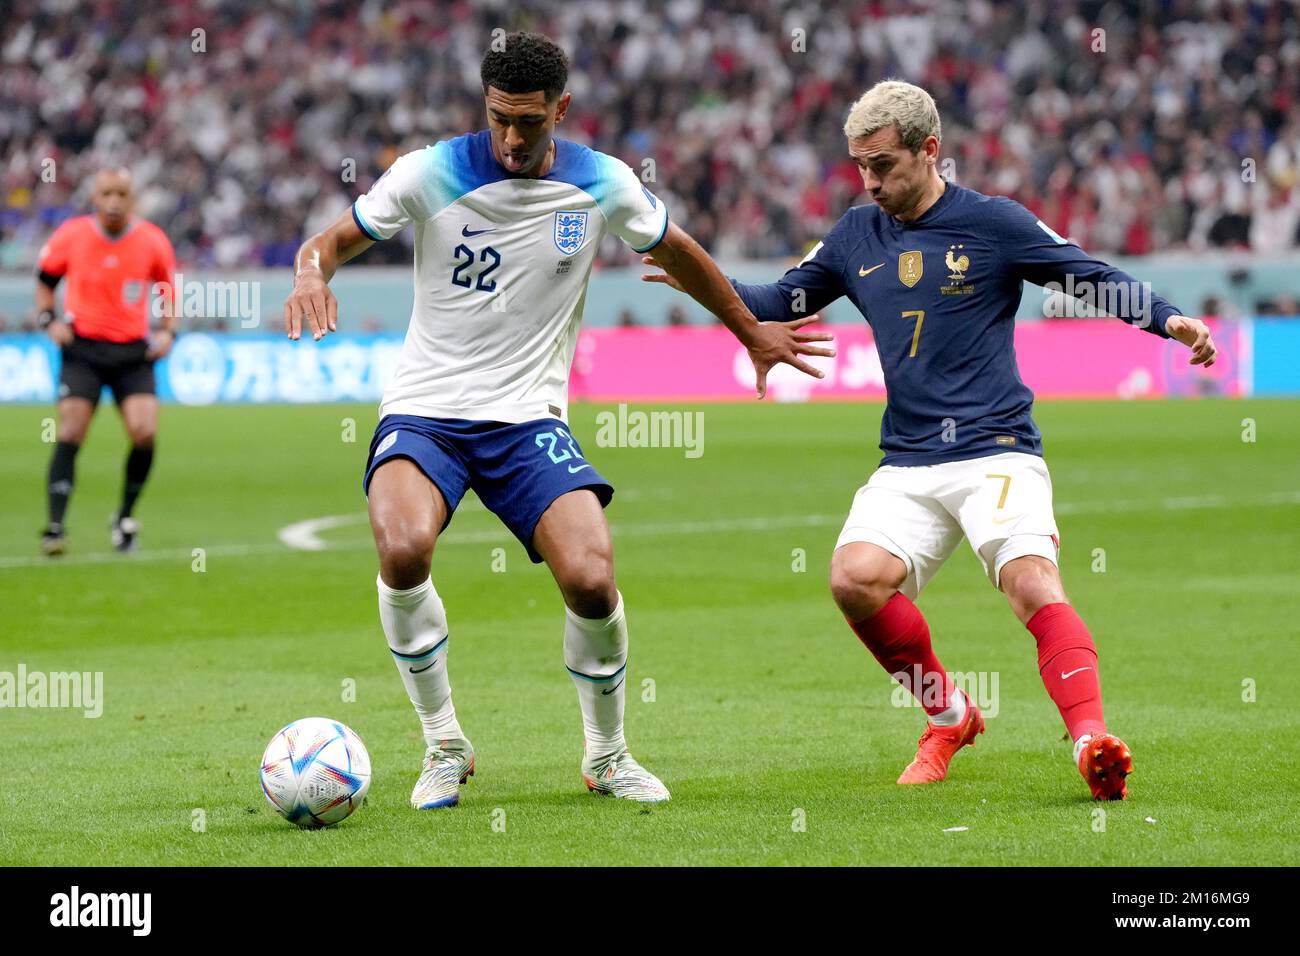 England's Jude Bellingham battles for possession of the ball with France's Antoine Griezmann during the FIFA World Cup Quarter-Final match at the Al Bayt Stadium in Al Khor, Qatar. Picture date: Saturday December 10, 2022. Stock Photo